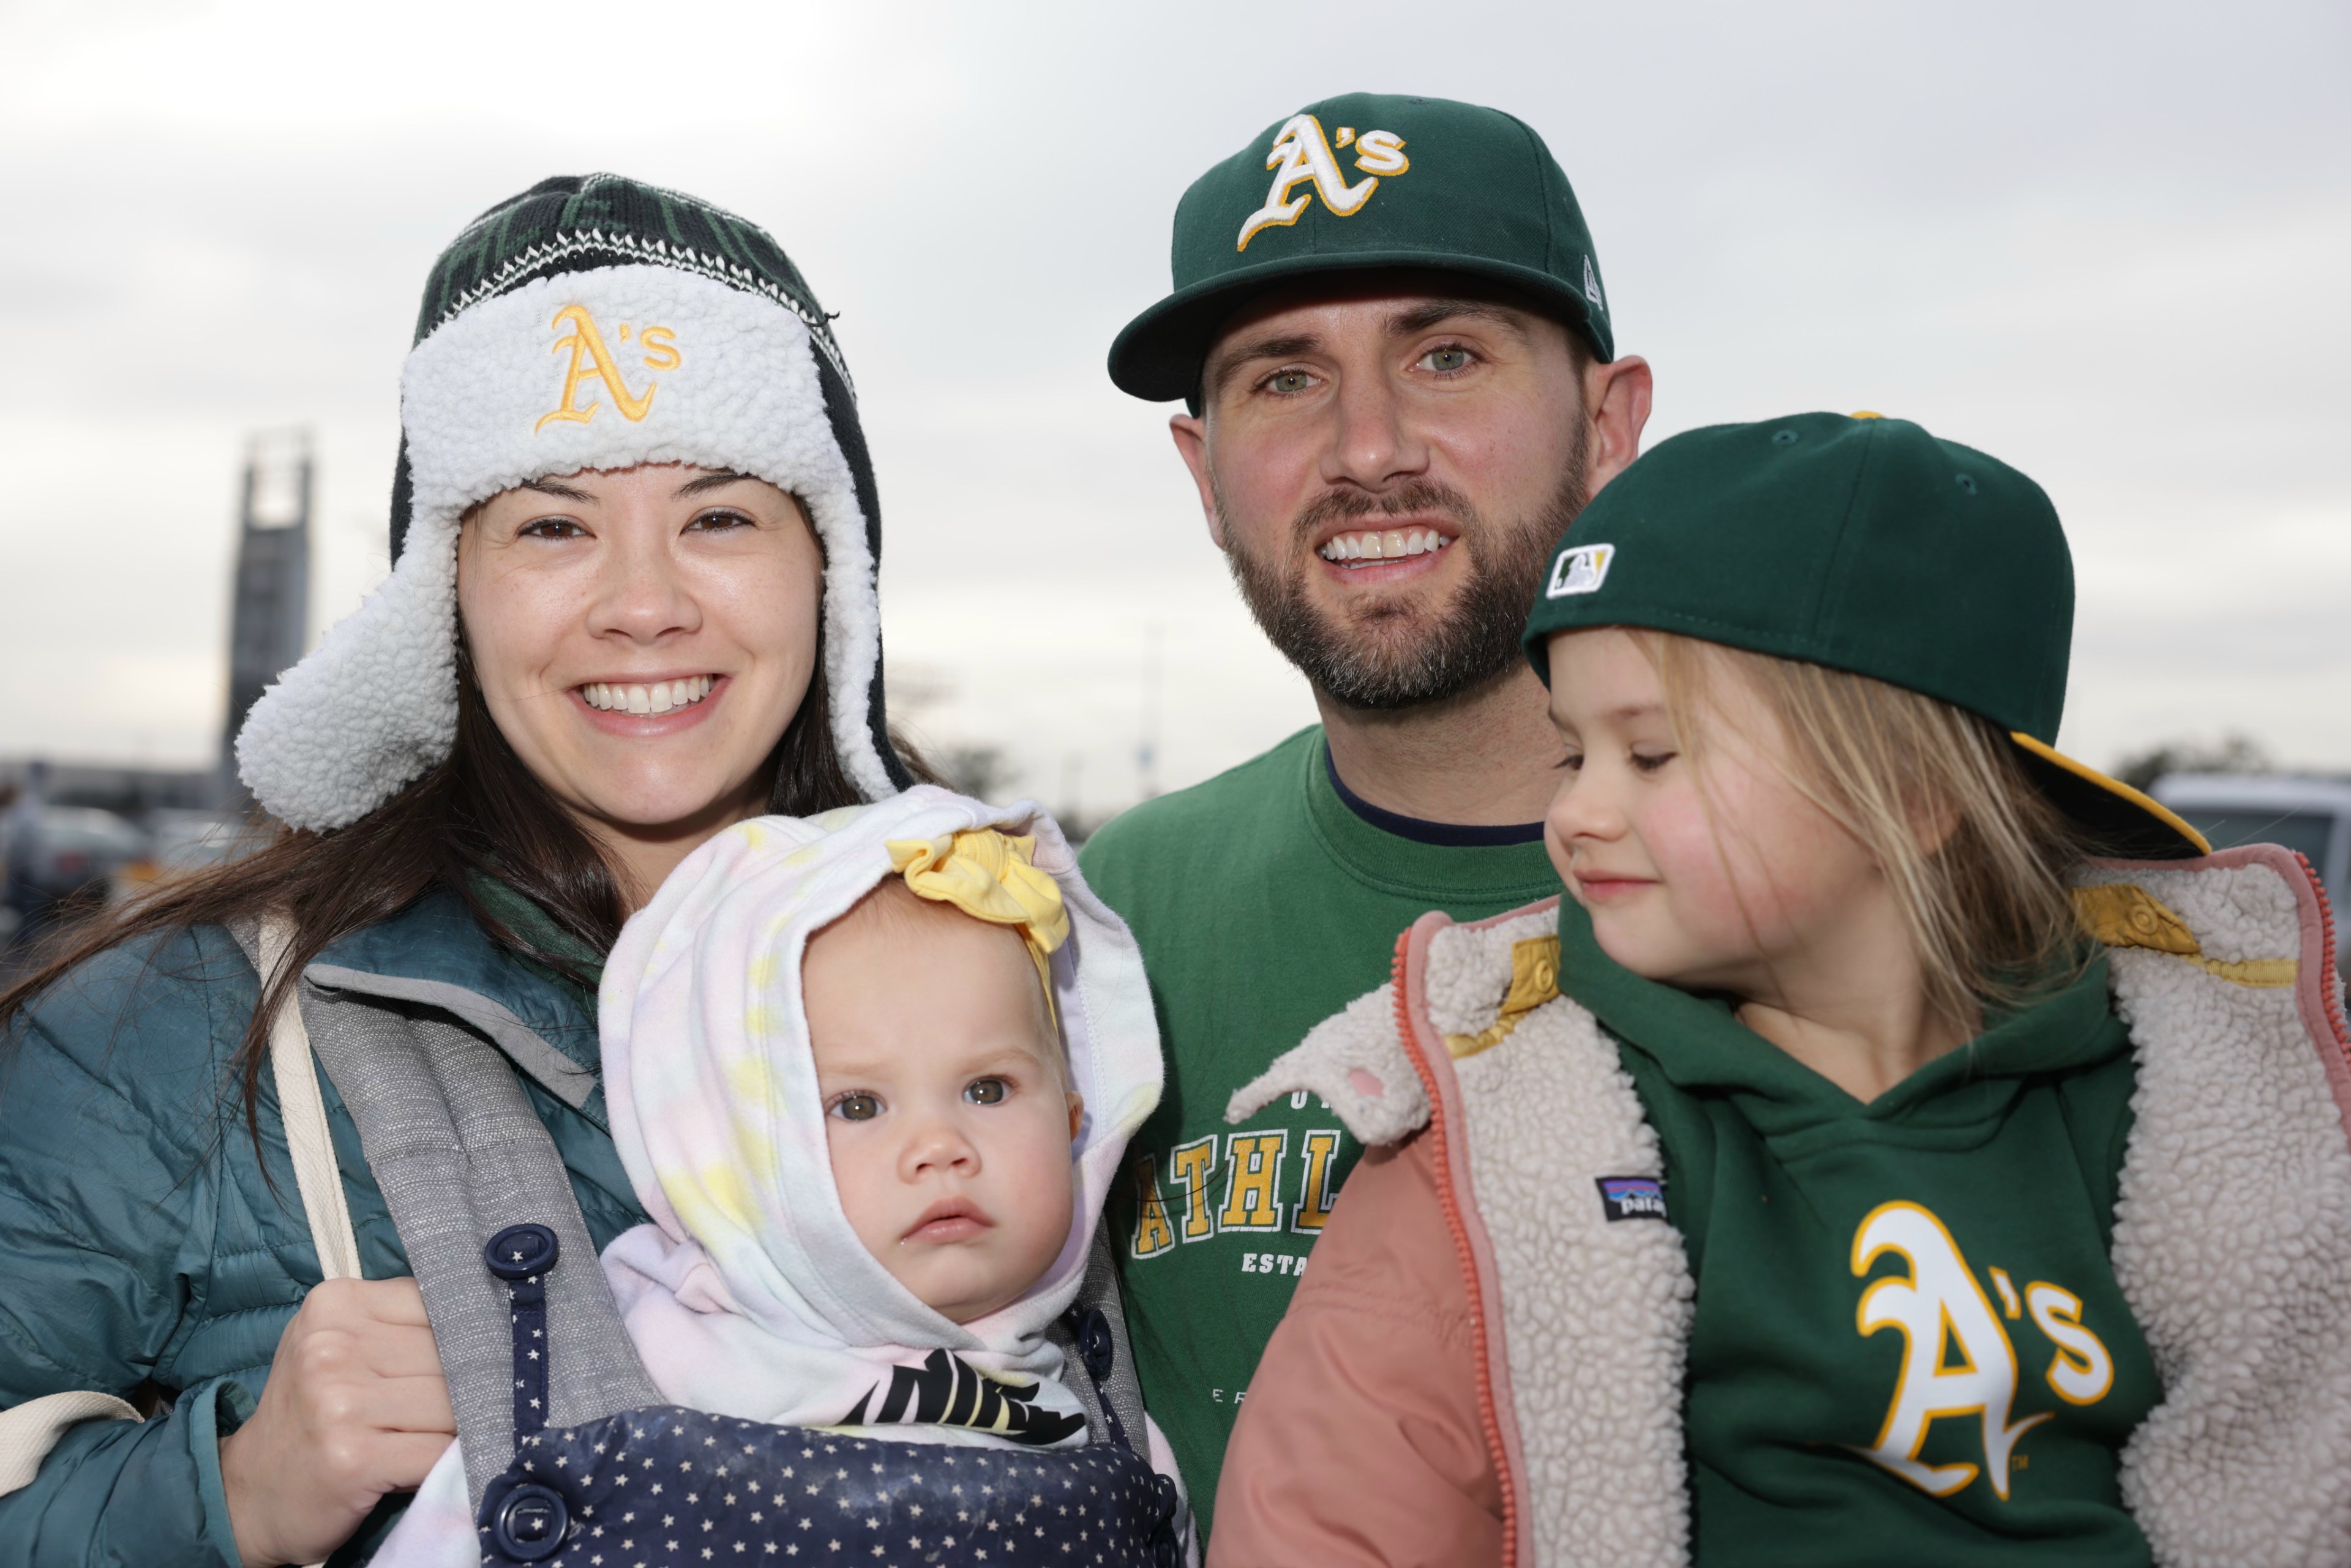 A family of four, clad in Oakland A's gear, smiles outdoors, with two young children in tow.